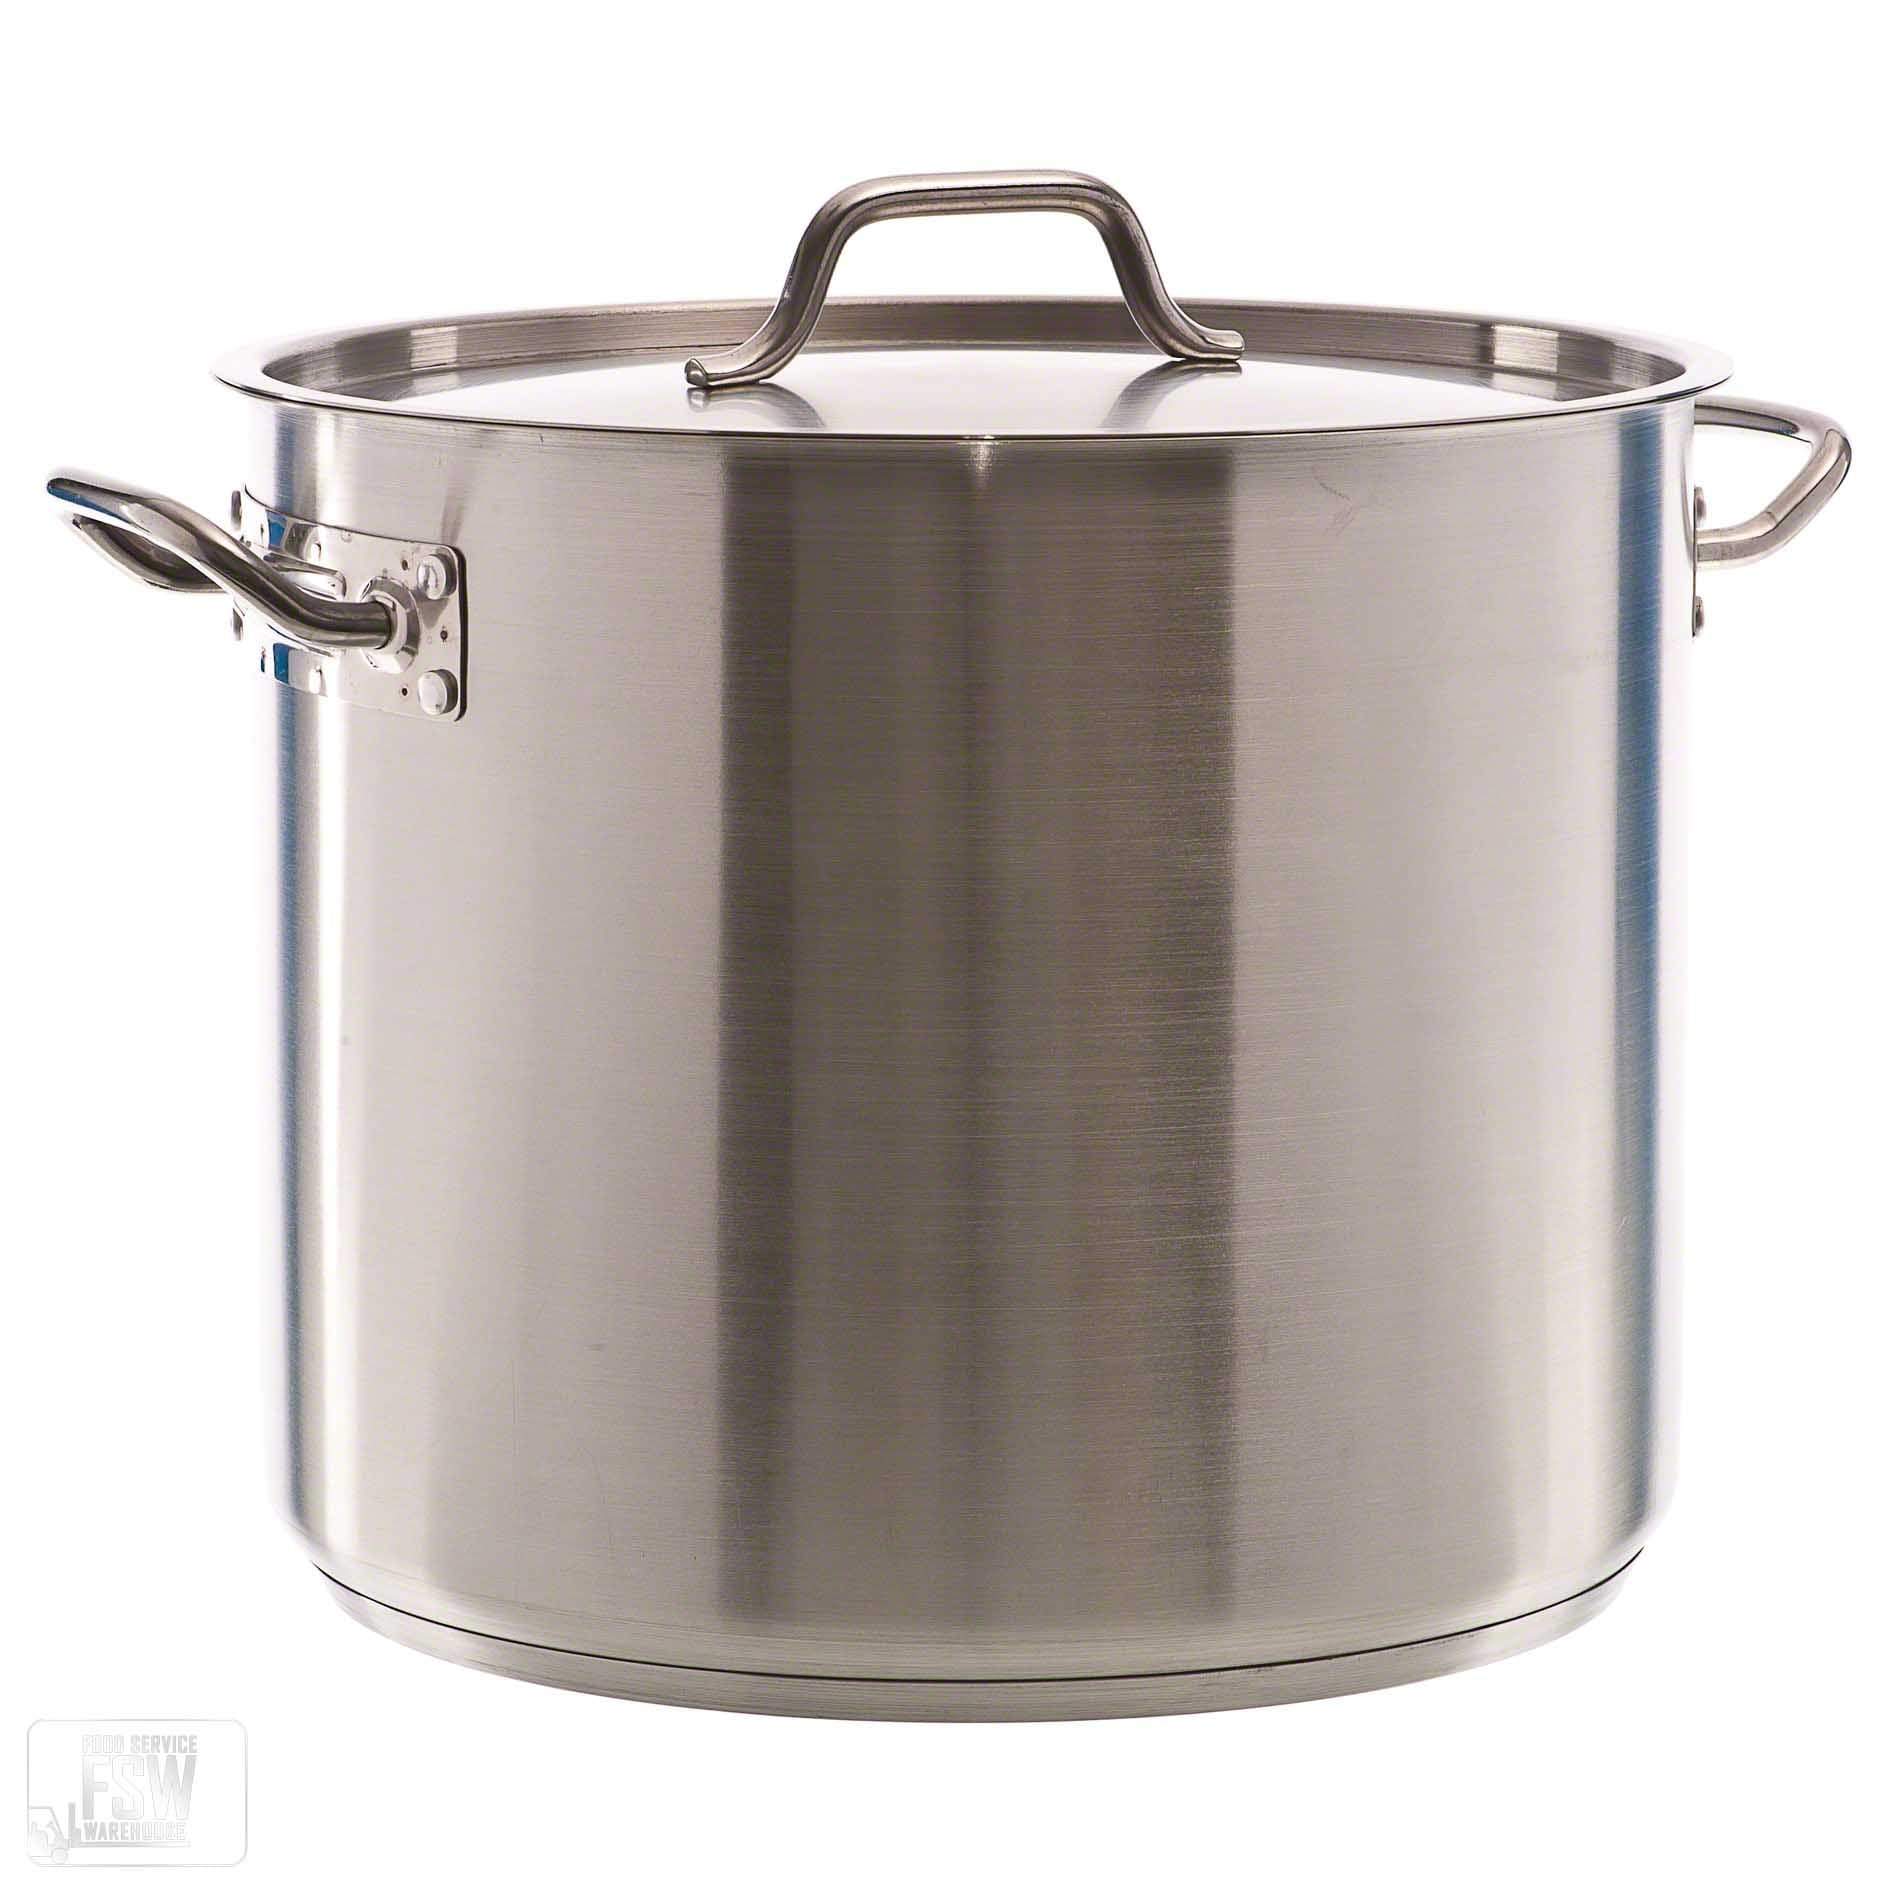  Cuisinart 766-24 Chef's Classic 8-Quart Stockpot with Cover,  Stainless Steel: Cusinart Pot: Home & Kitchen